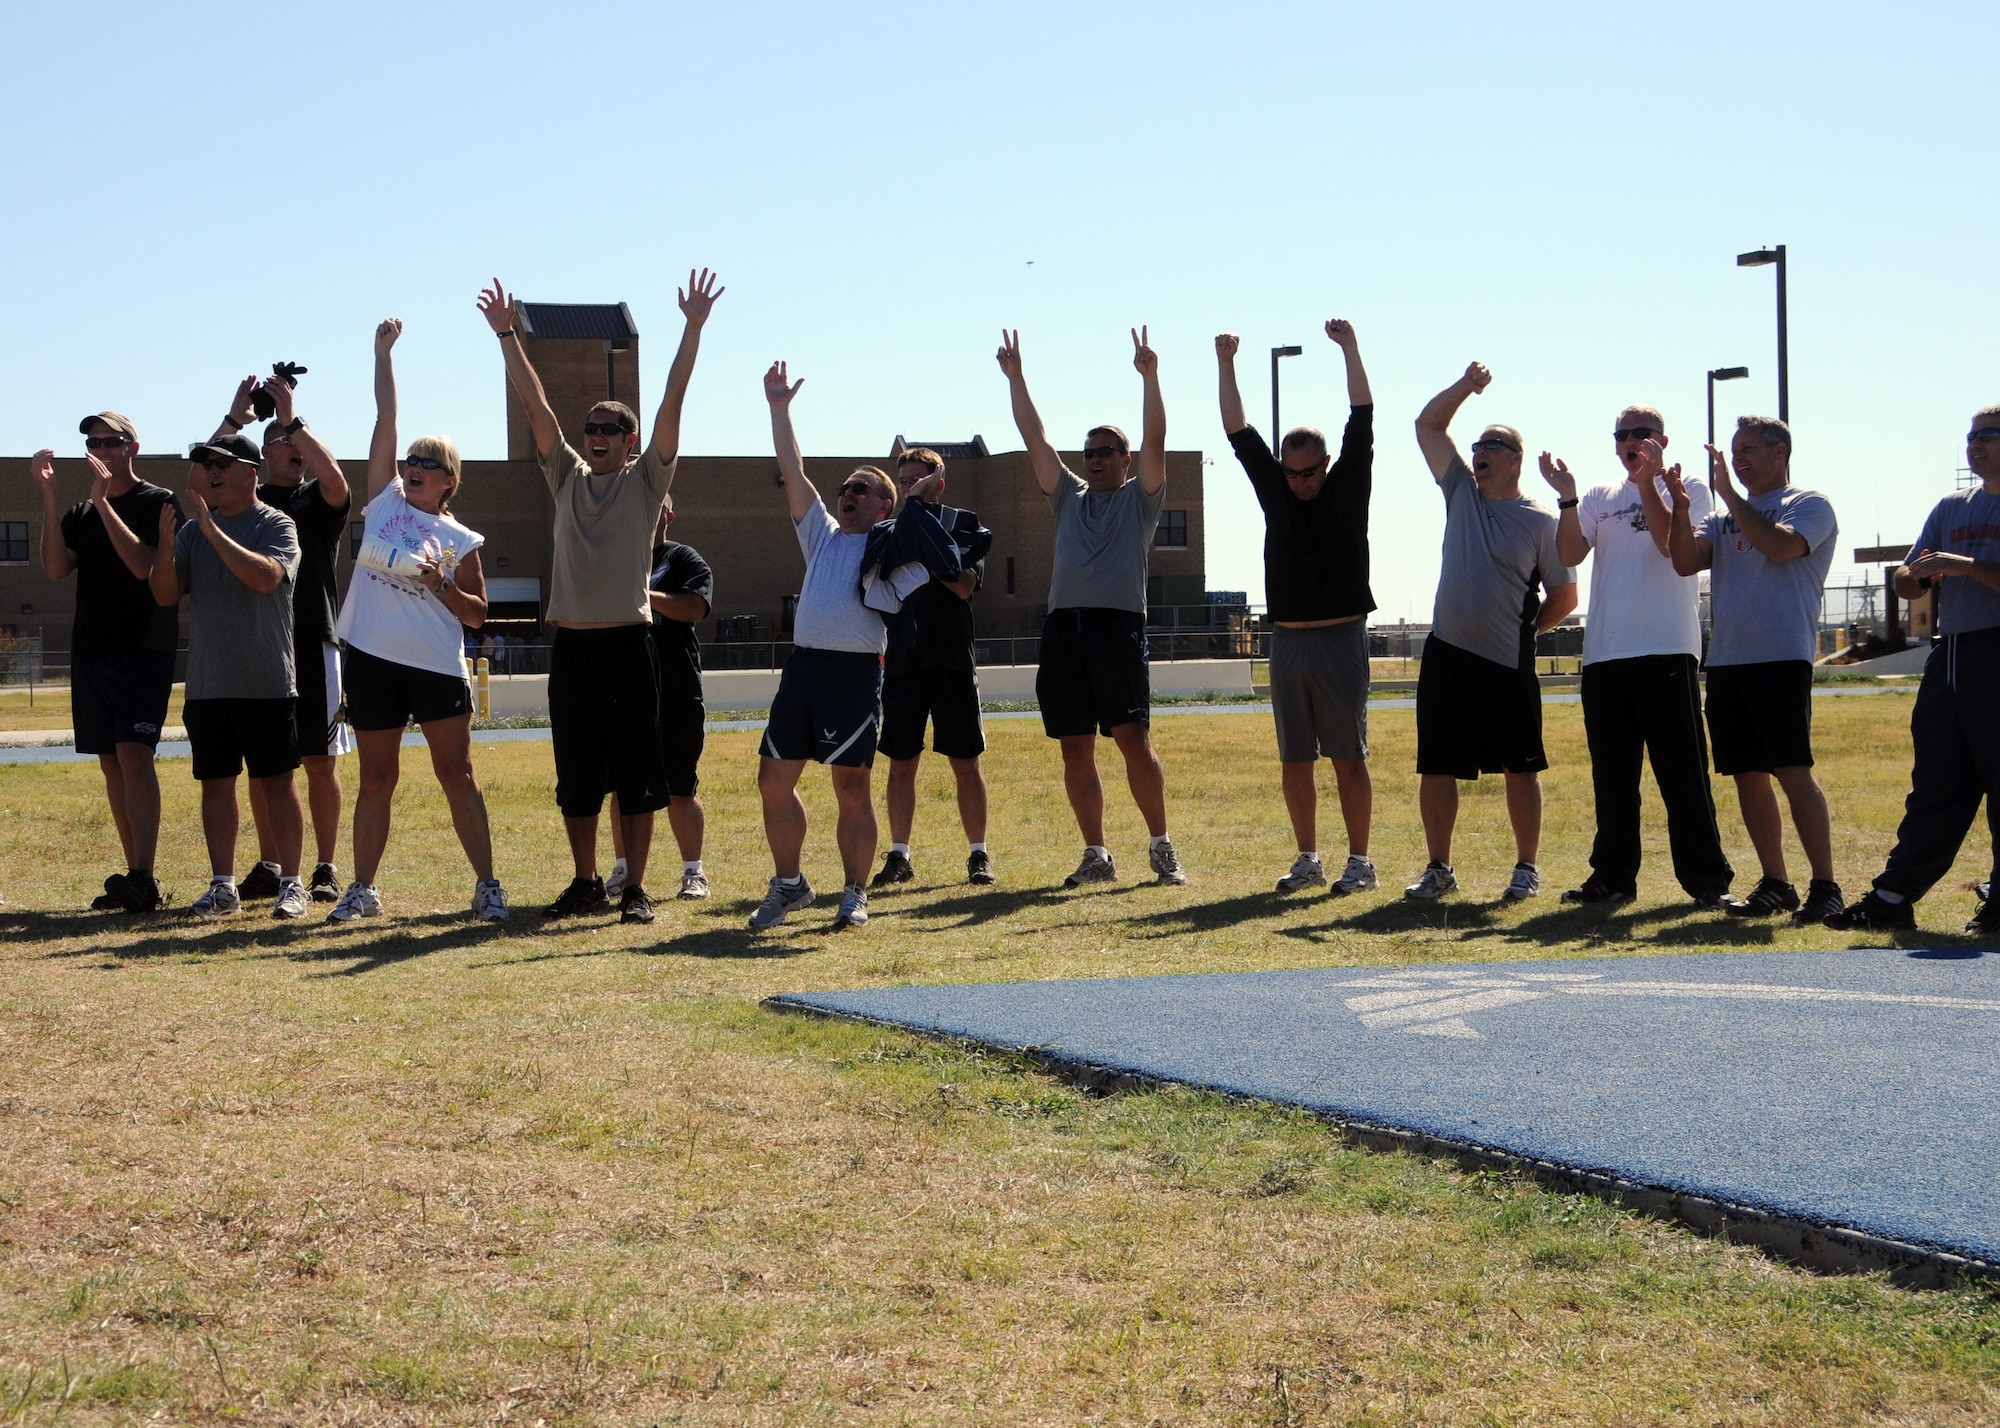 Airmen assigned to the 137th Maintenance Group here  celebrate victory as they were announced as the first-place winners during the base Olympics held on base, Oct 1. Coming in a close second was the 137th Air Refueling Wing, and following in third was the 137th Medical Group.
(U.S. Air Force Photo by Staff Sgt Caroline Hayworth/Released)